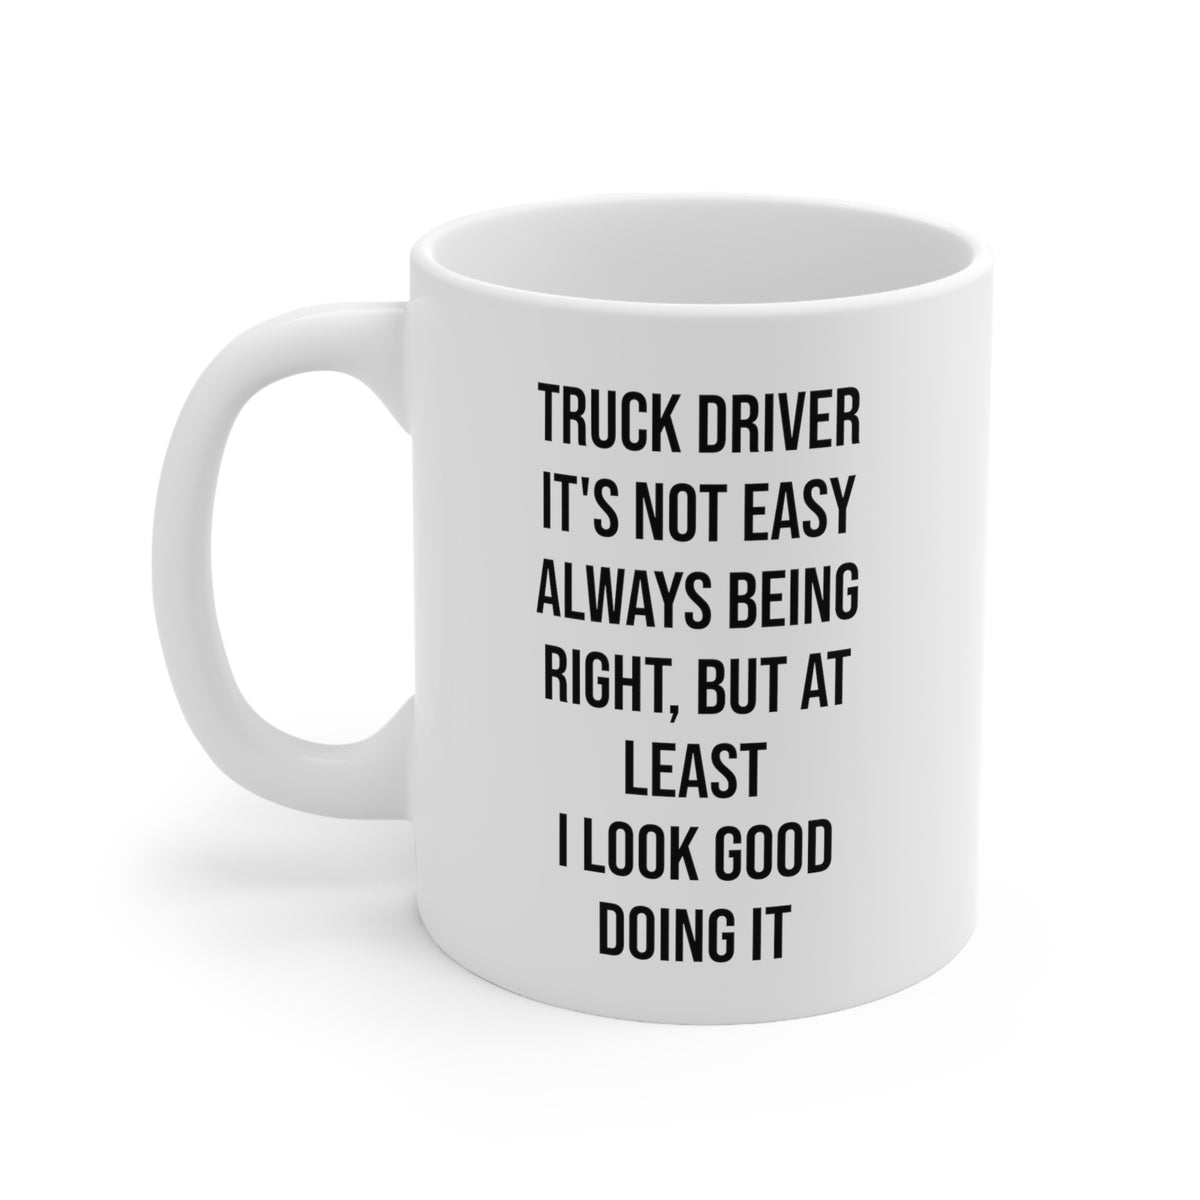 Truck Driver Coffee Mug - Truck Driver It's Not easy always being right - Funny Trucker Gifts For Men